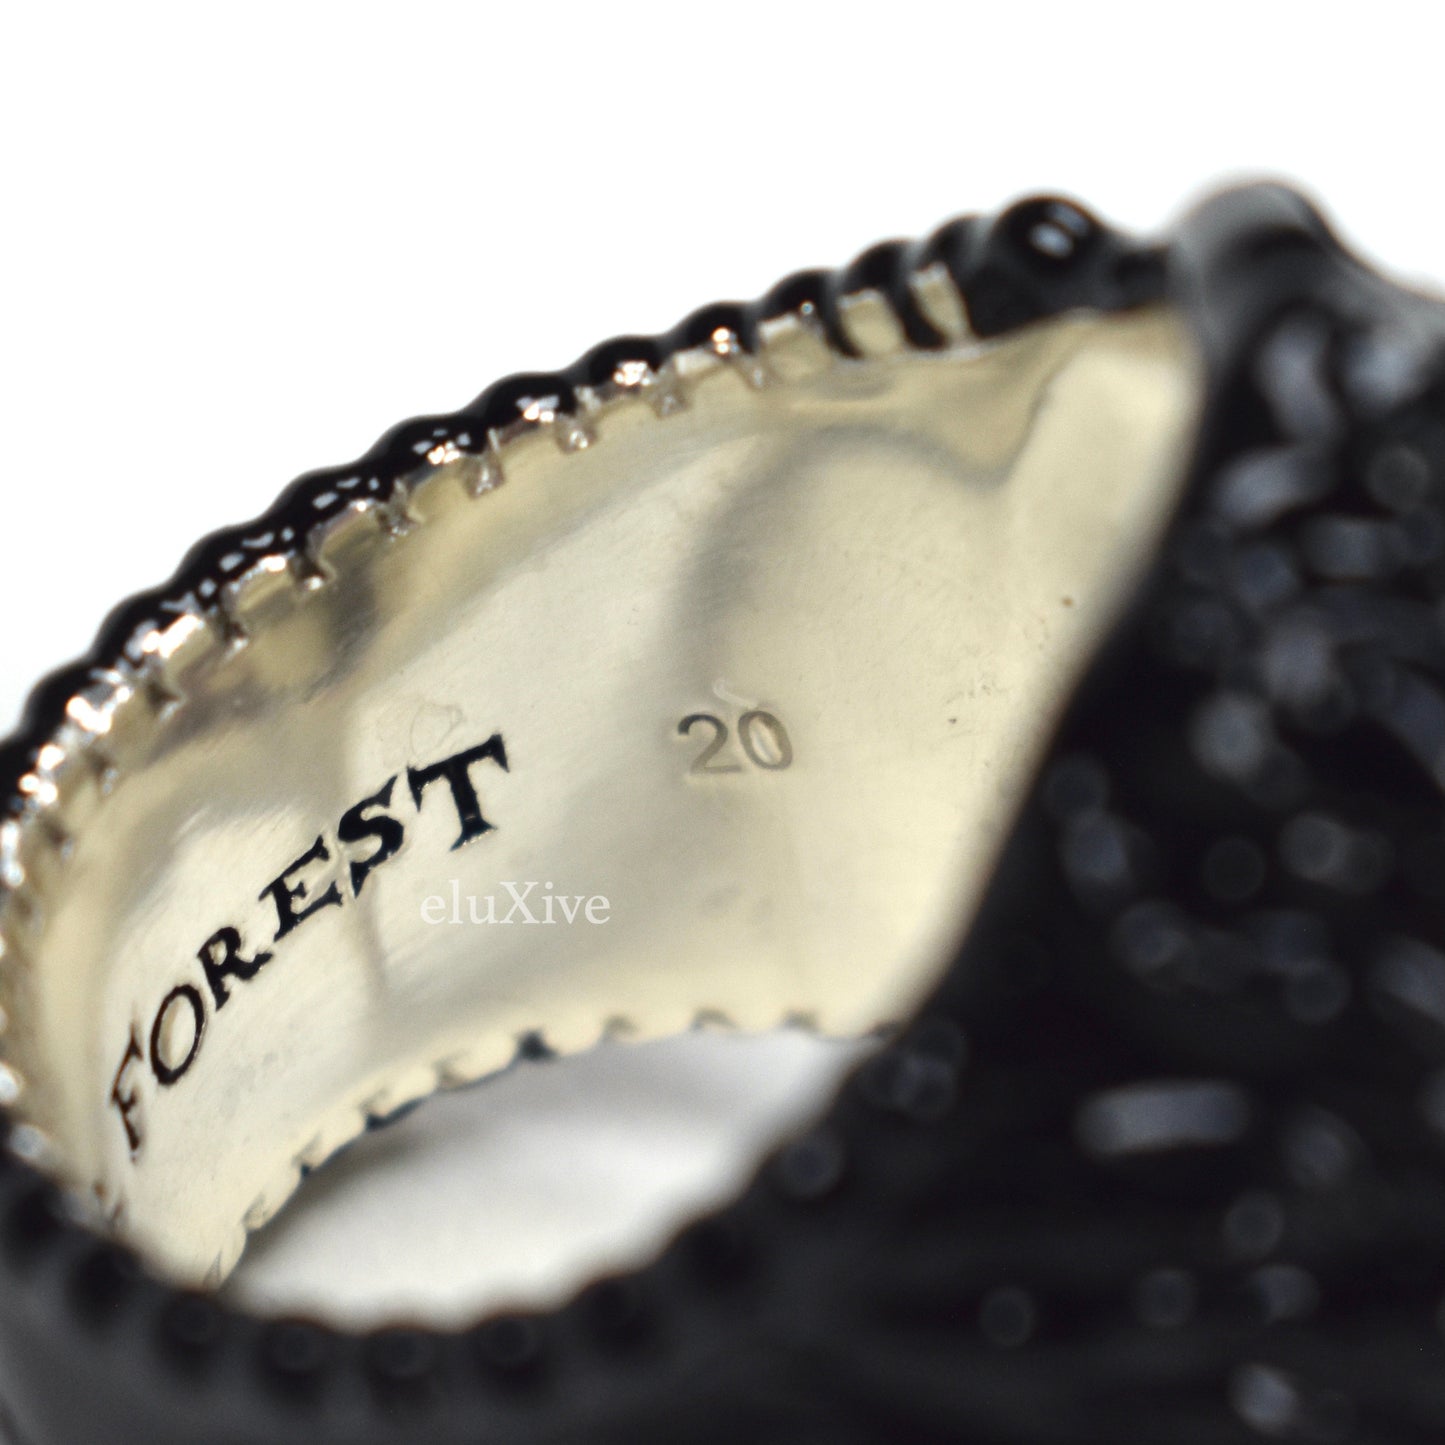 Gucci - Silver / Black Anger Forest Eagle Statement Ring